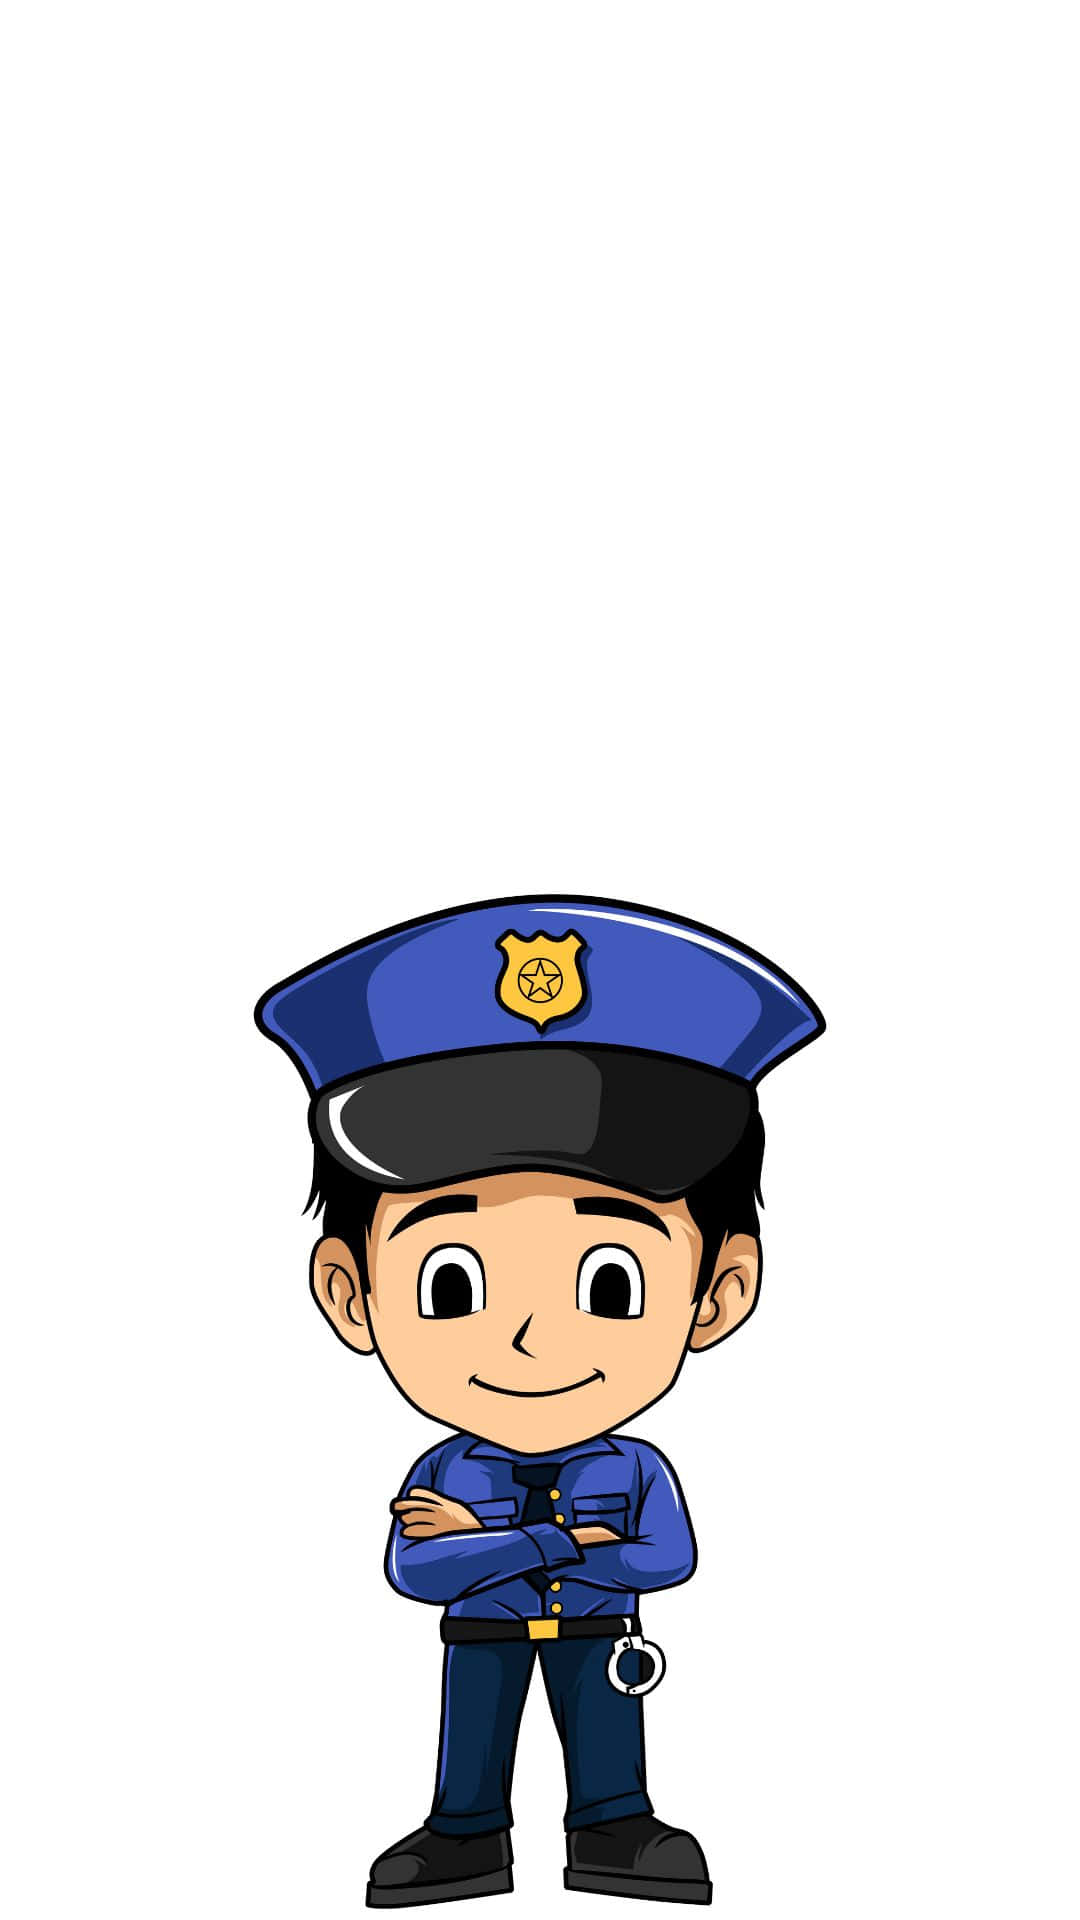 Cute Cop In Uniform With Arms Crossed Wallpaper